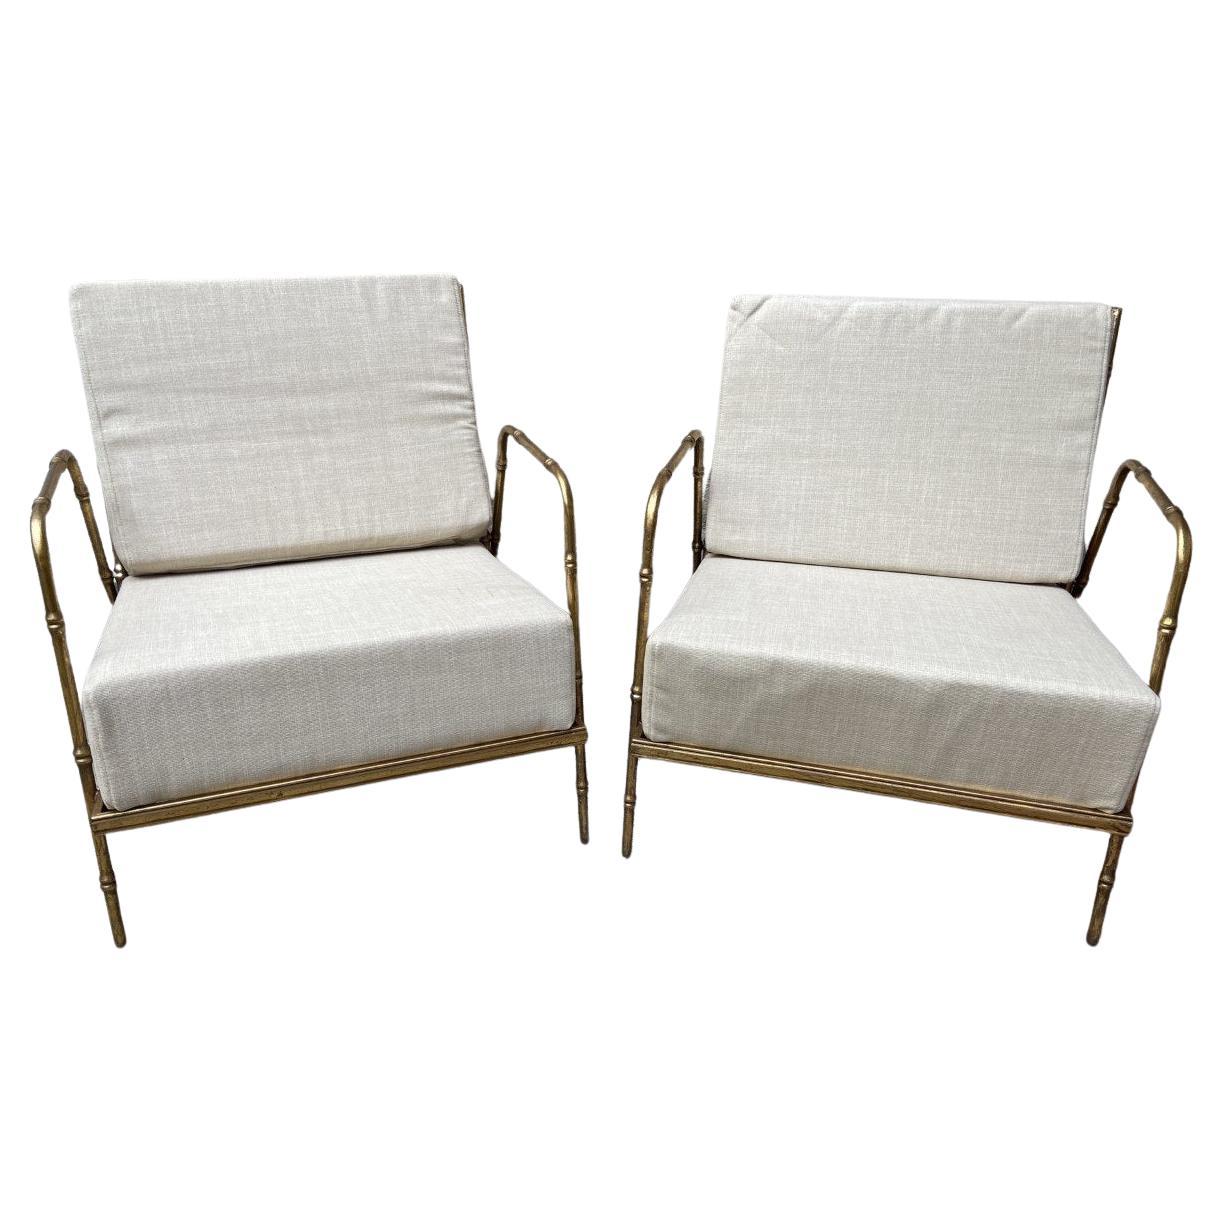 Pair of Armchairs, in the Style of Jansen, circa 2000